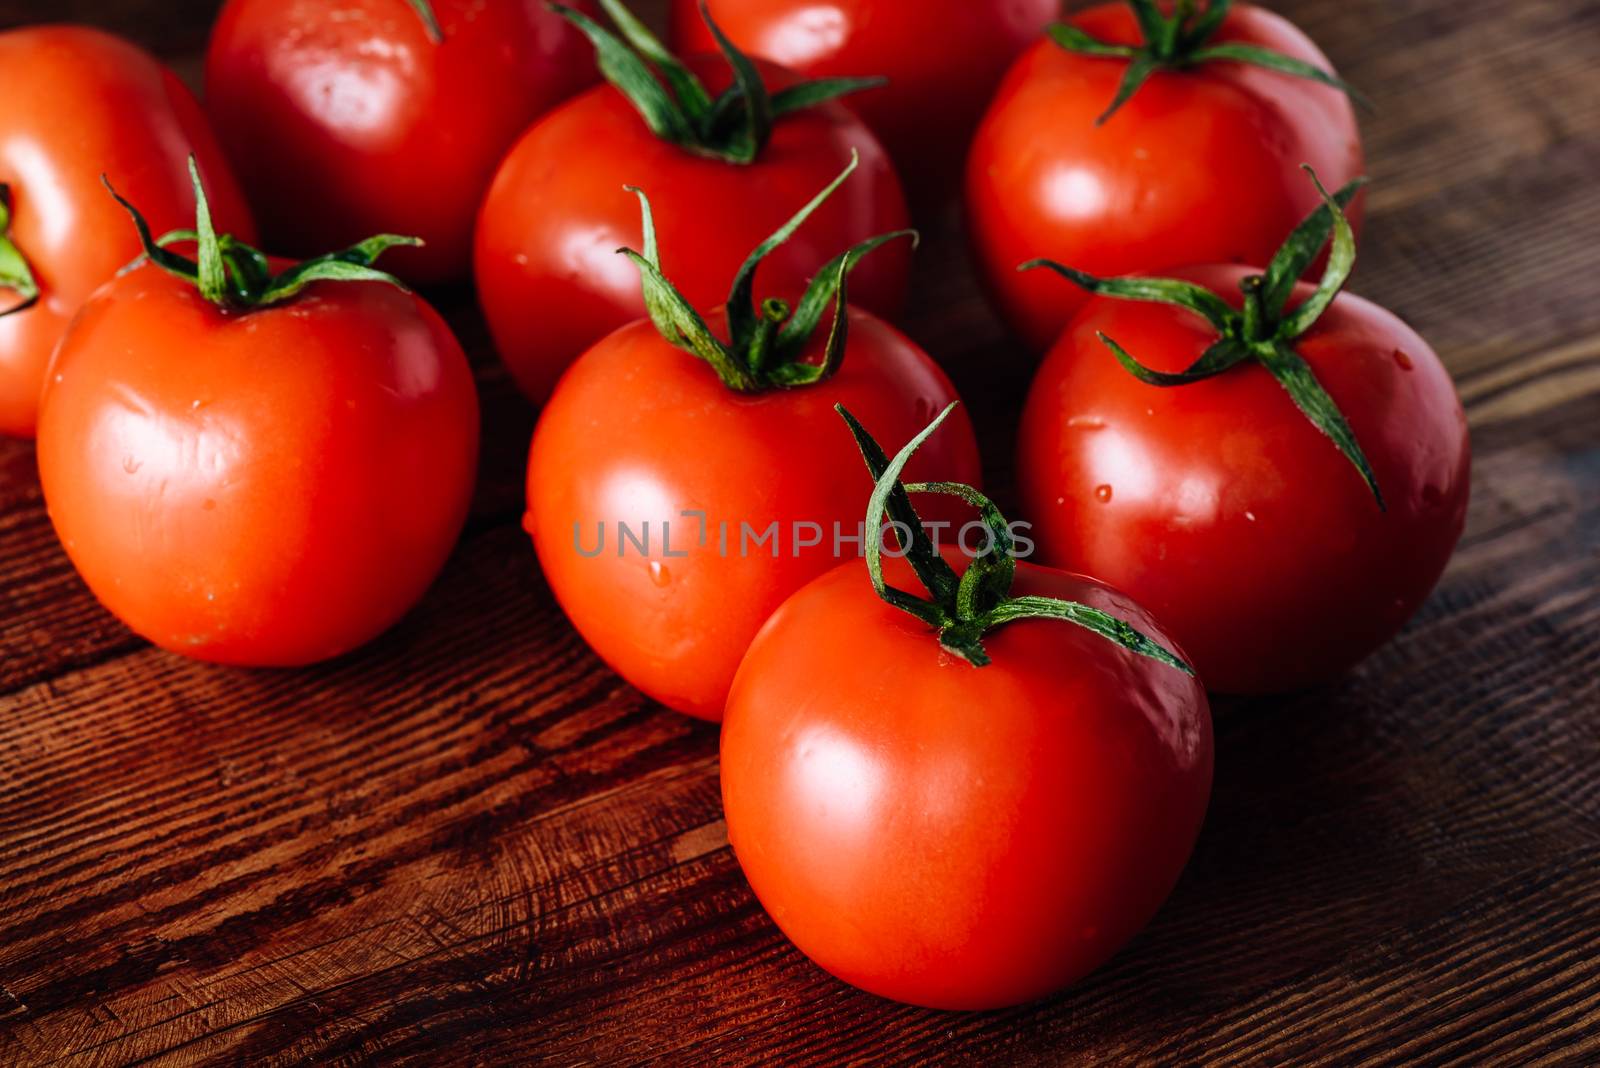 Some Red Tomatoes on Wooden Table by Seva_blsv